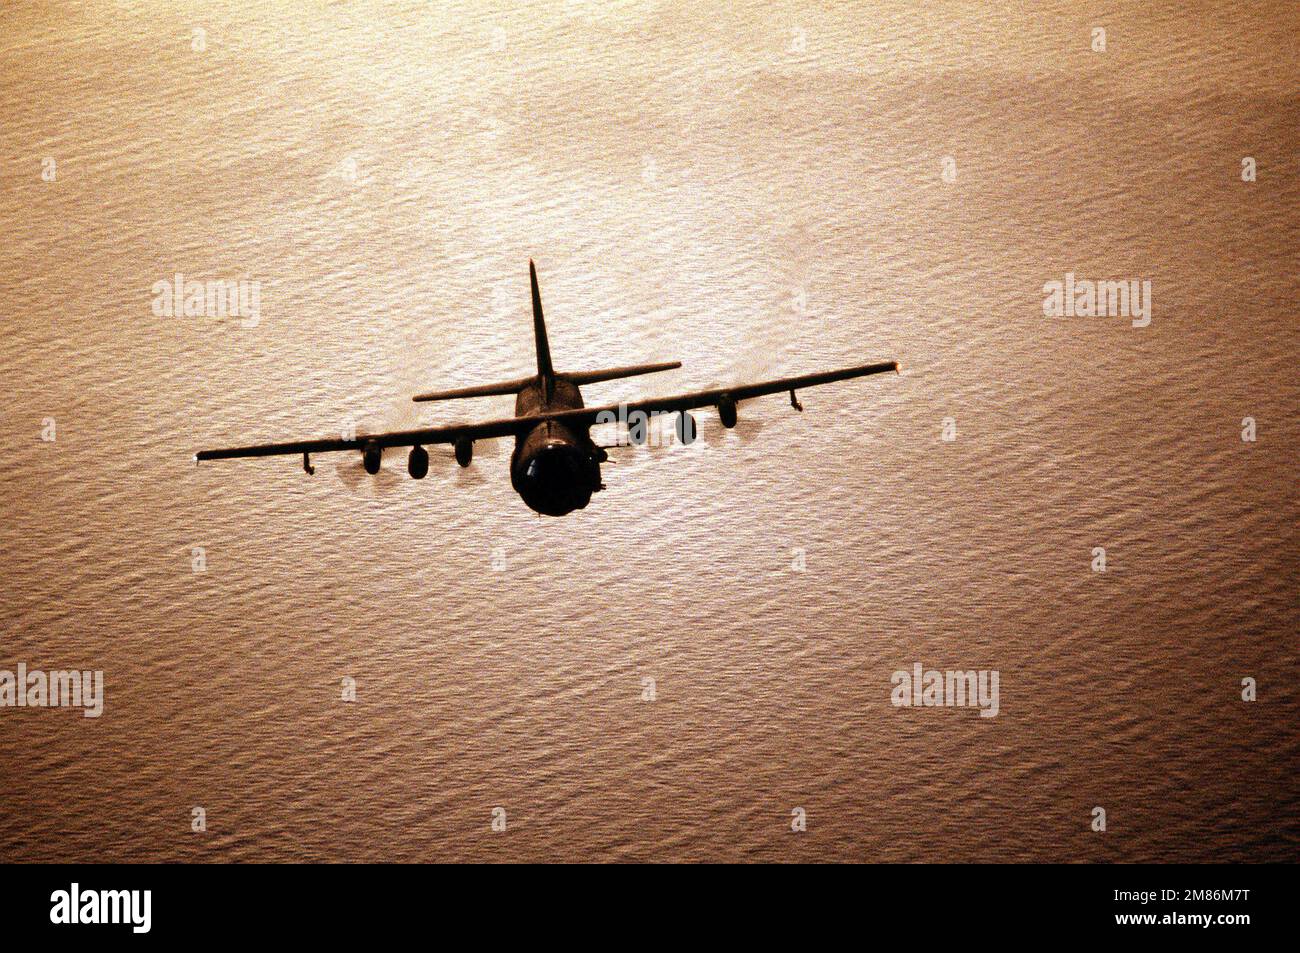 Mind Blowing facts about the Lockheed AC-130U Spooky II - Crew Daily